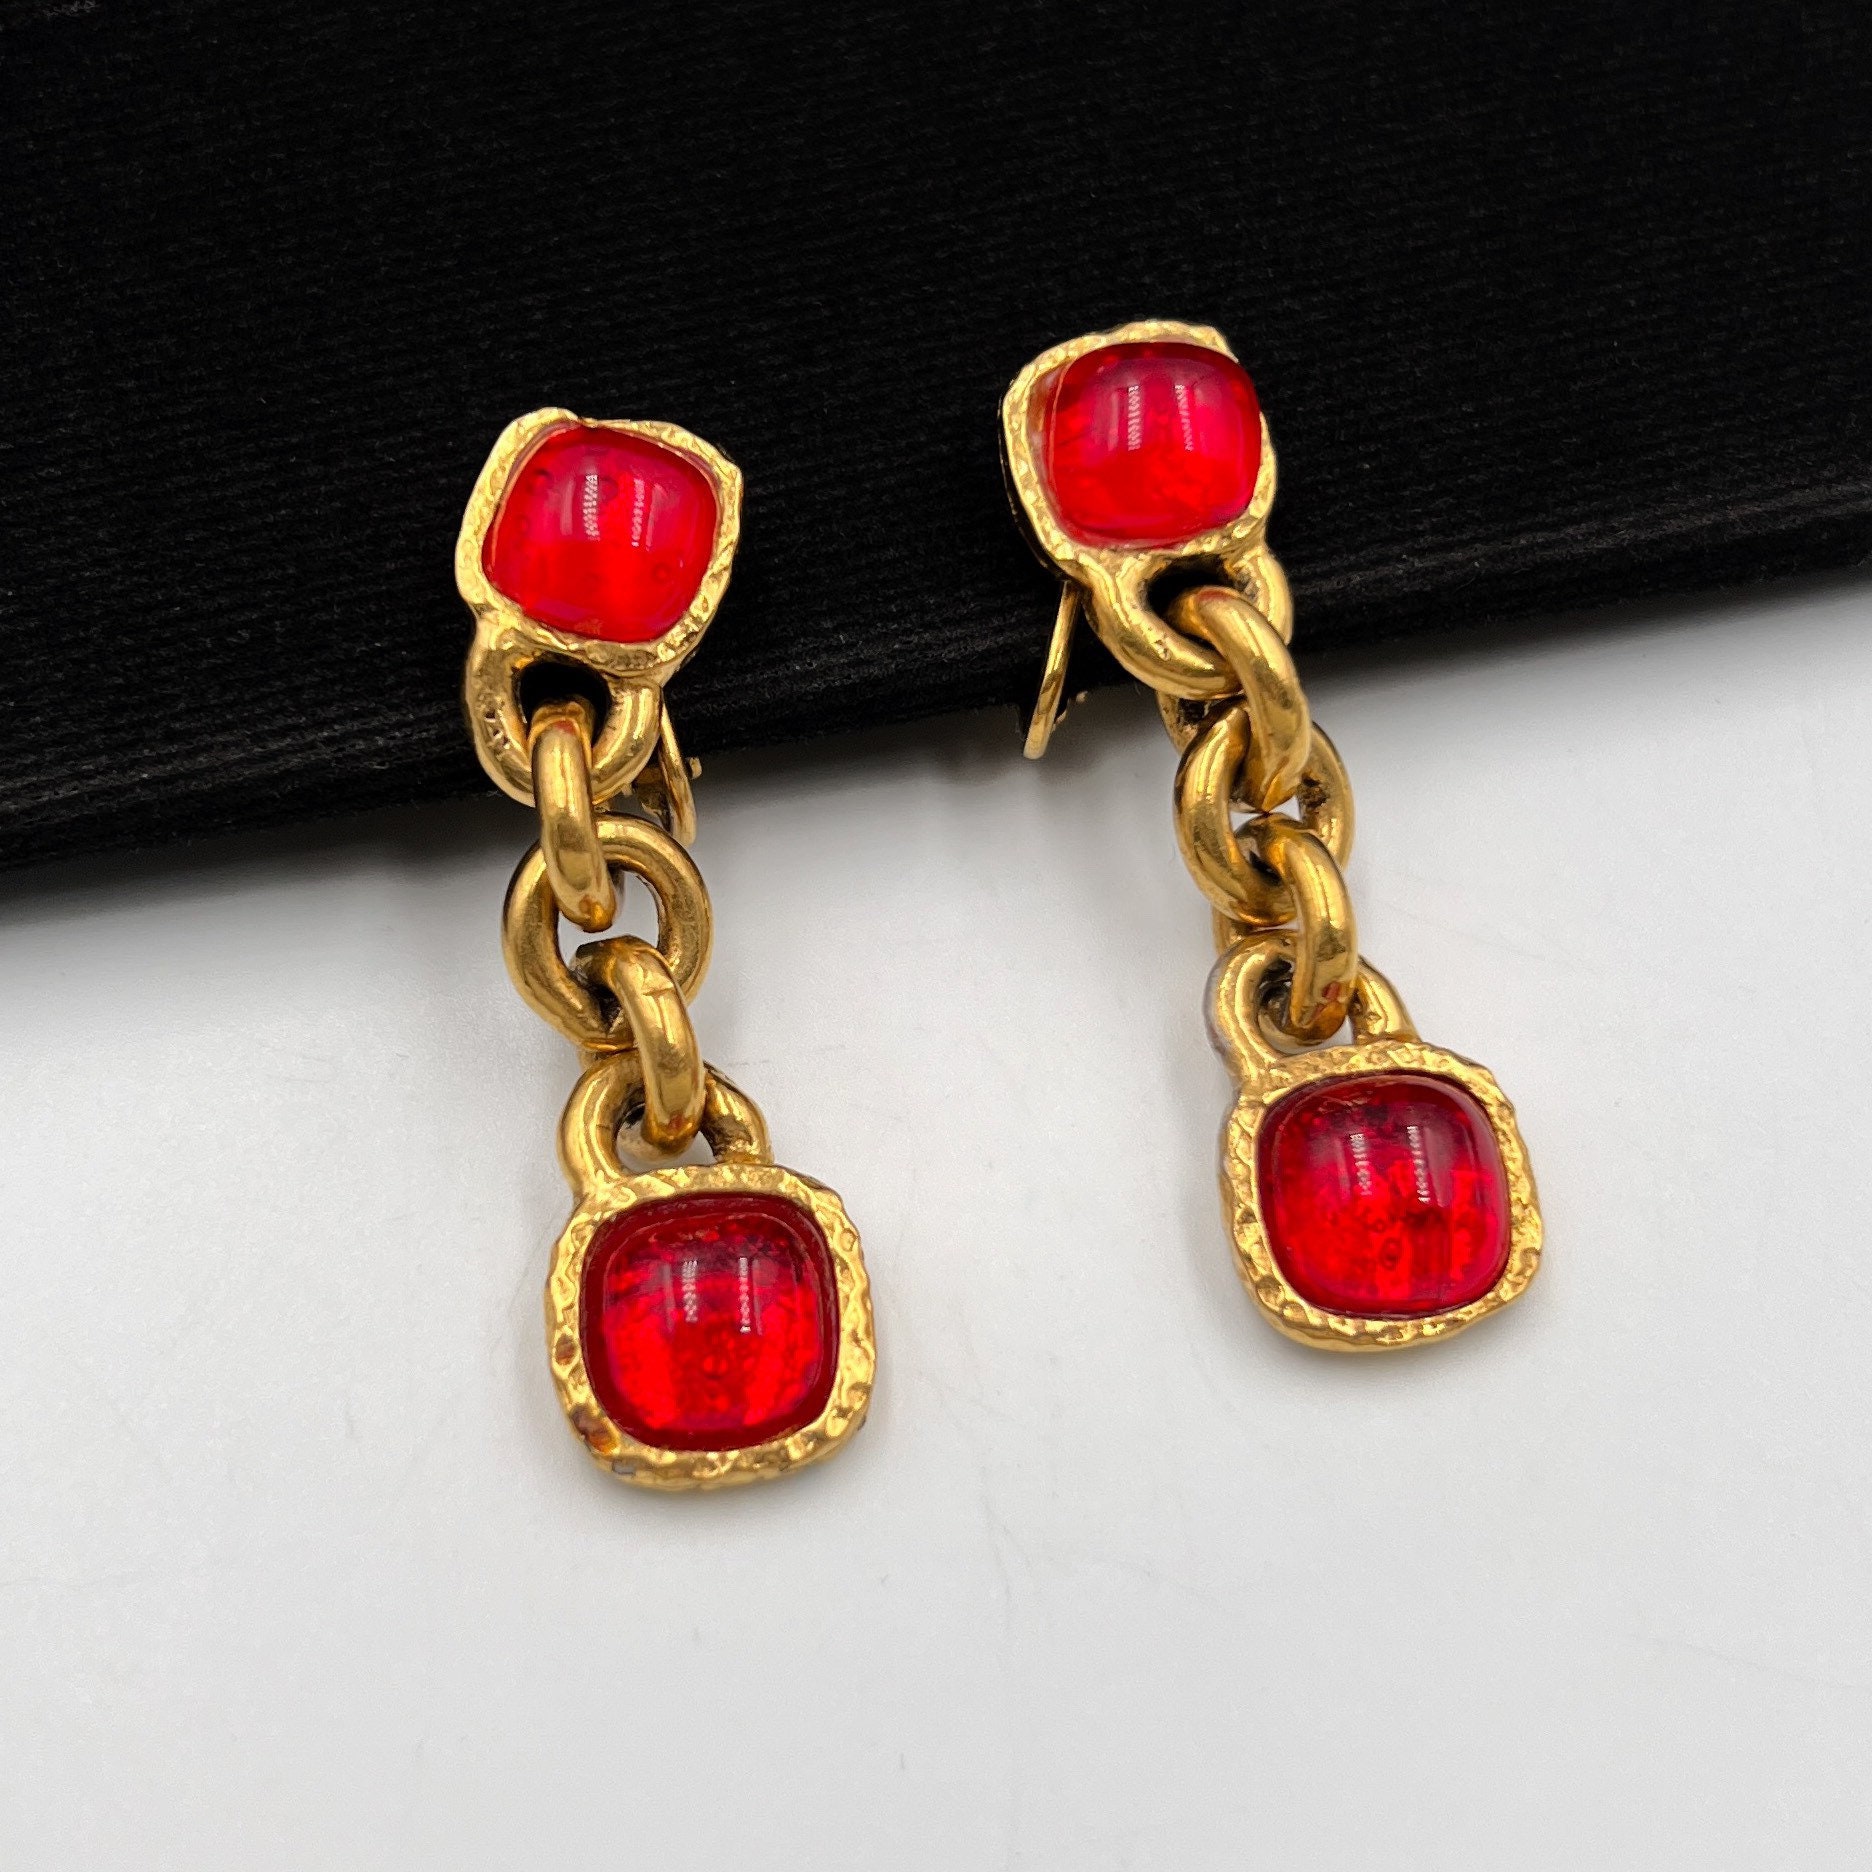 Authentic Chanel Gripoix Coco Mark Earrings With 18kt Gold Clips - Ruby Lane